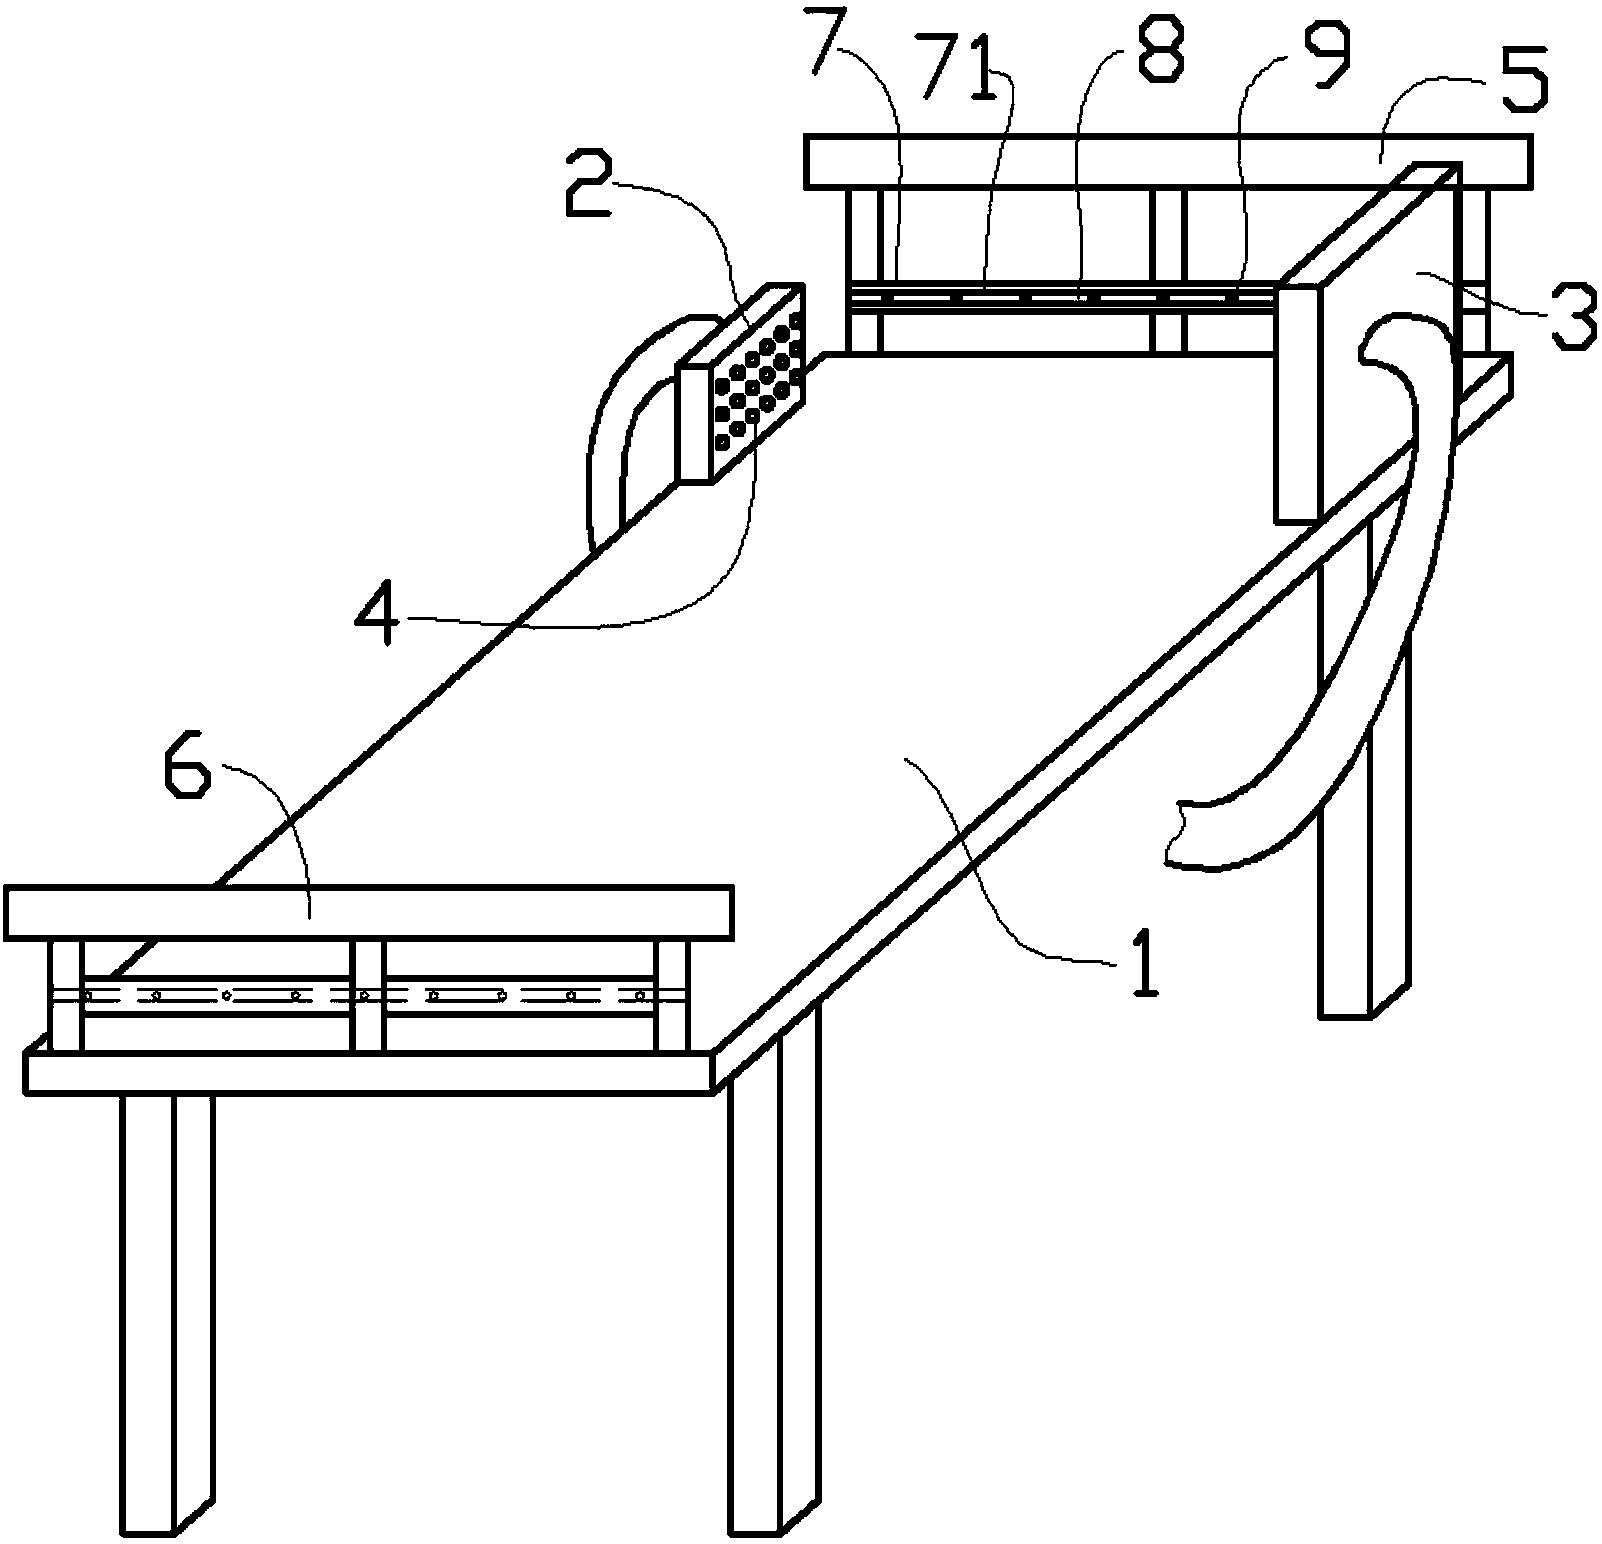 Medical bed with exhausting function and sleep assisting function